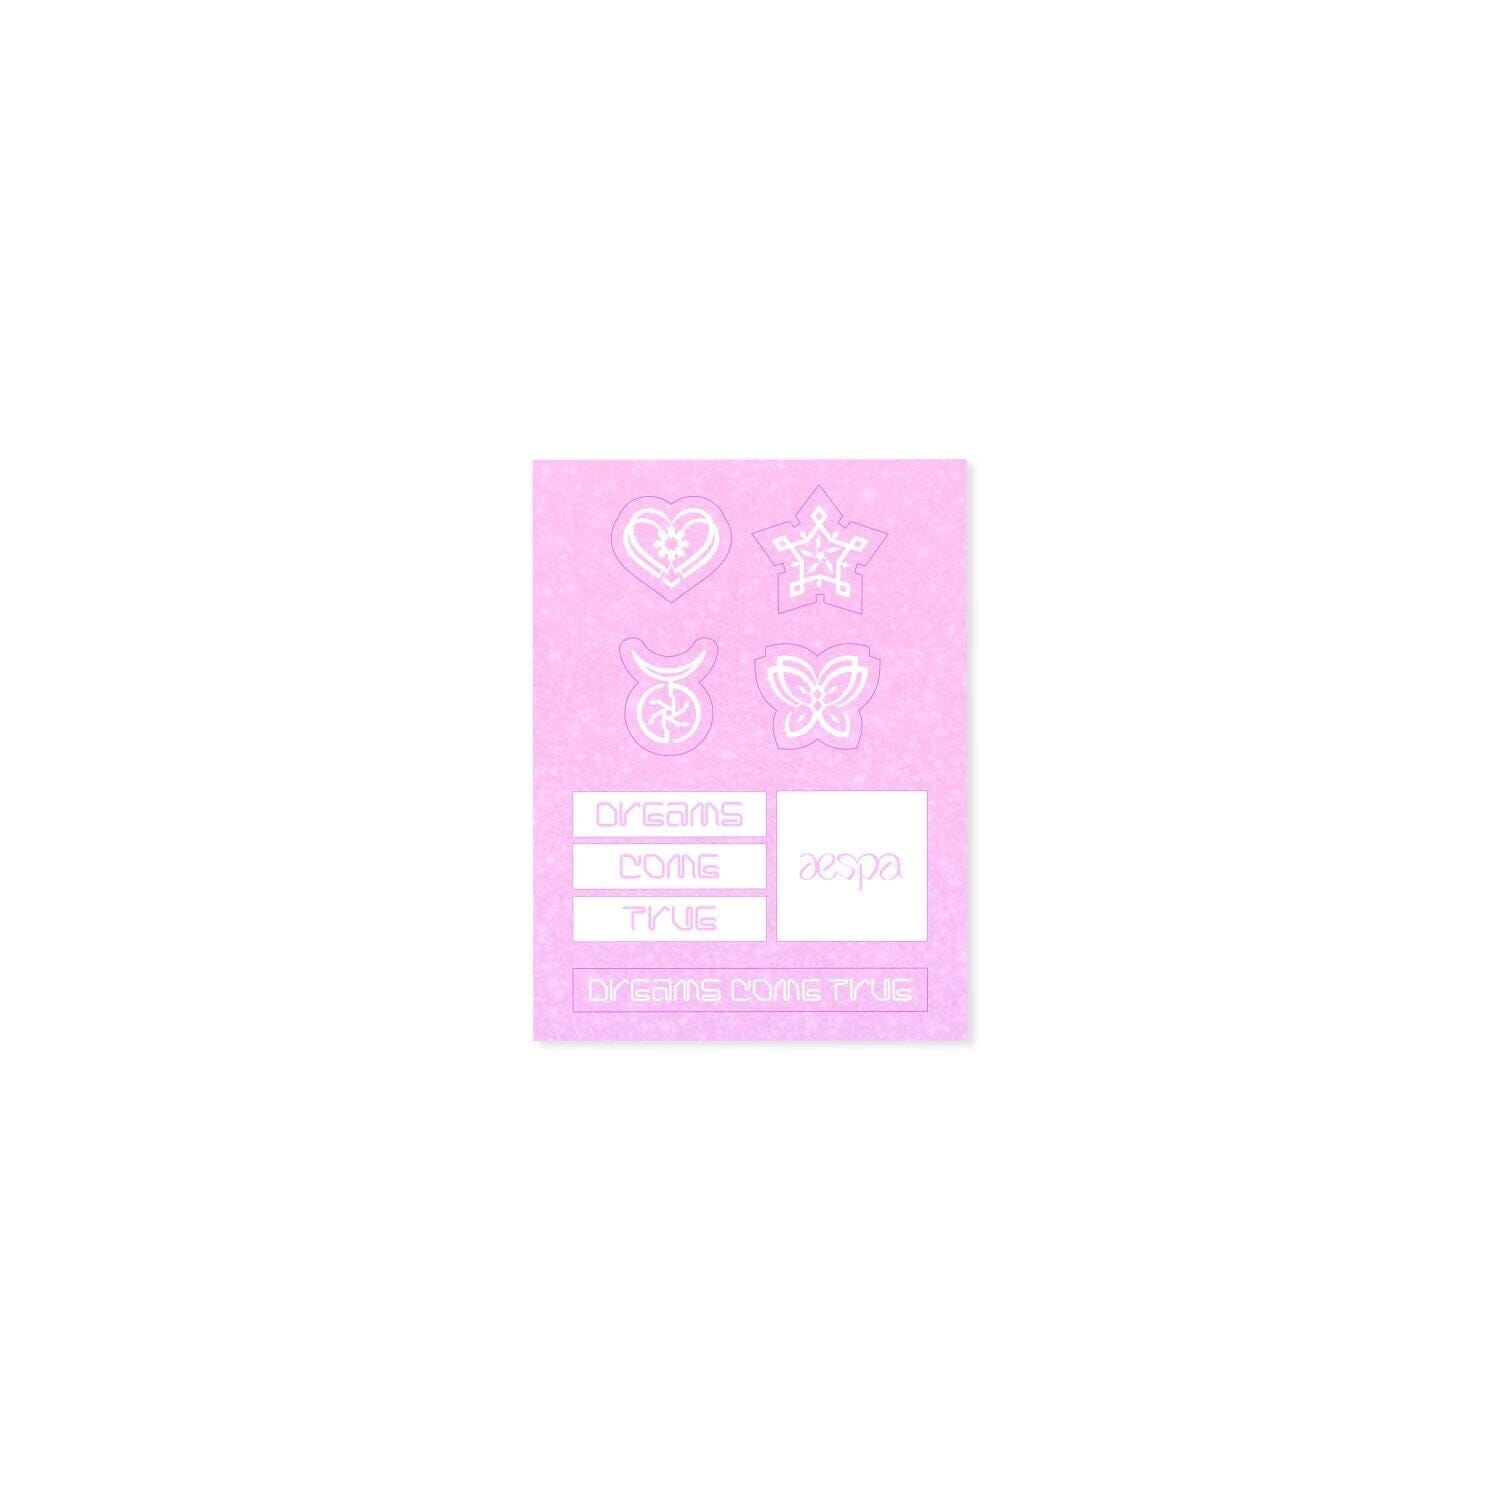 [SGS] aespa 'Dreams Come True' Clear Card Wallet with Sticker Set + SGS Exclusive photocard